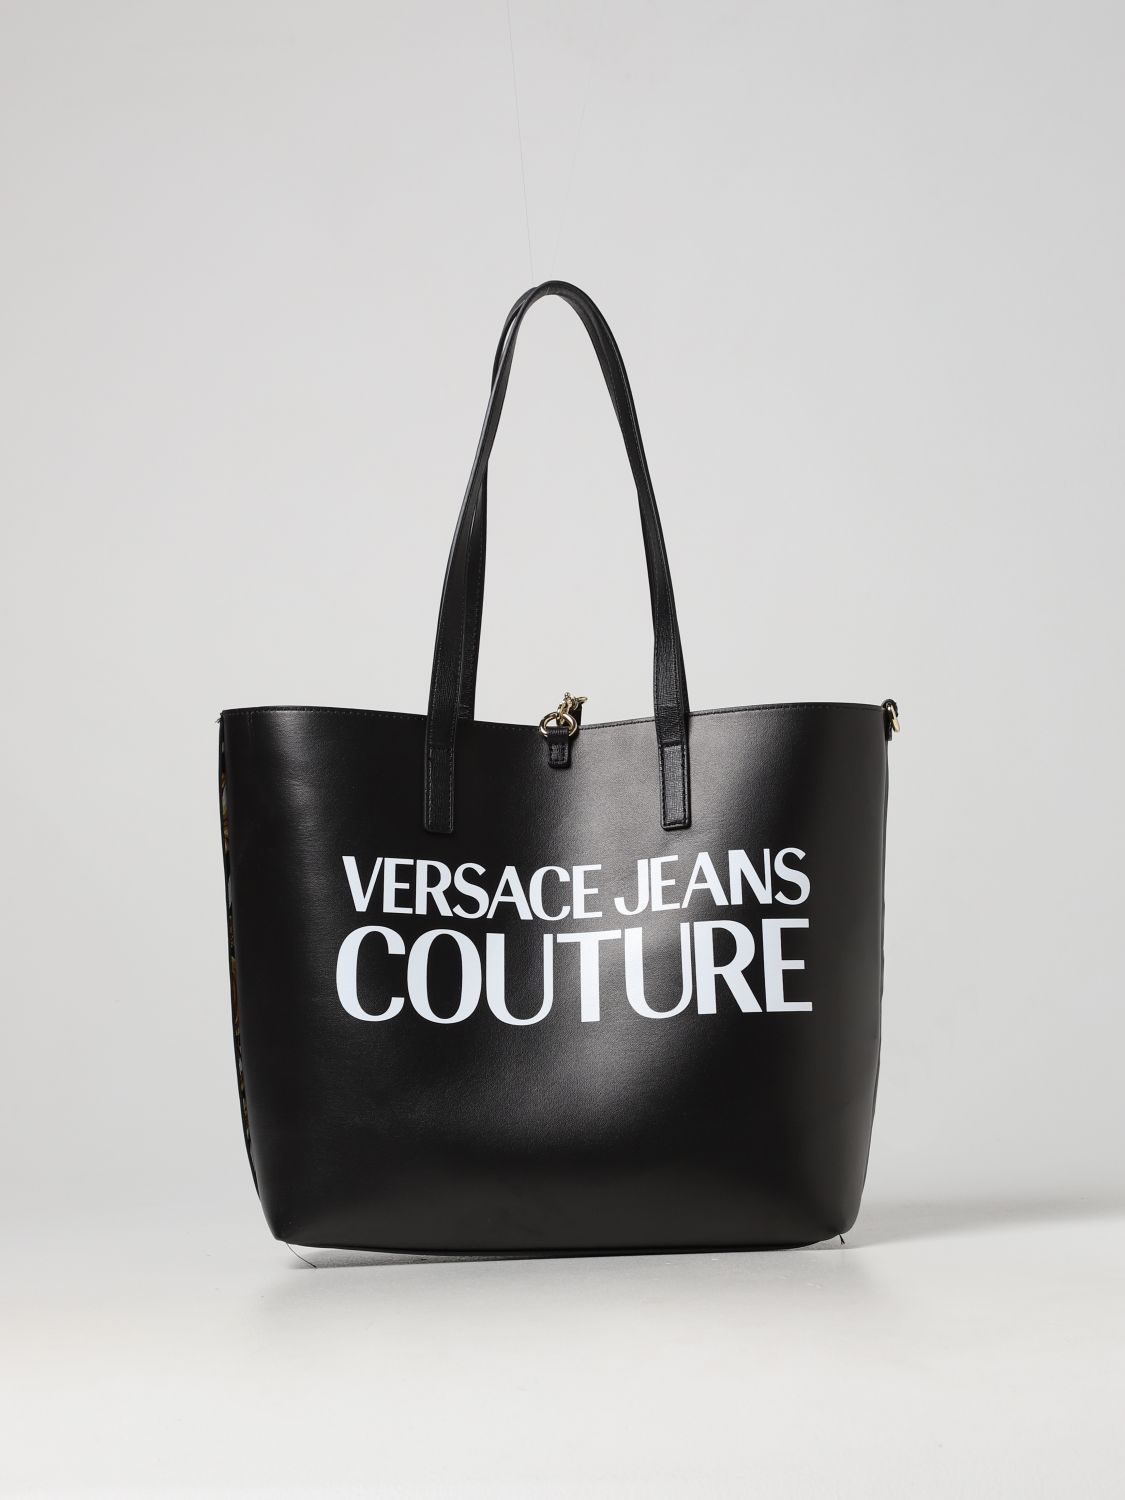 Bolso tote Versace Jeans Couture: Bolso tote Versace Jeans Couture para mujer negro 4